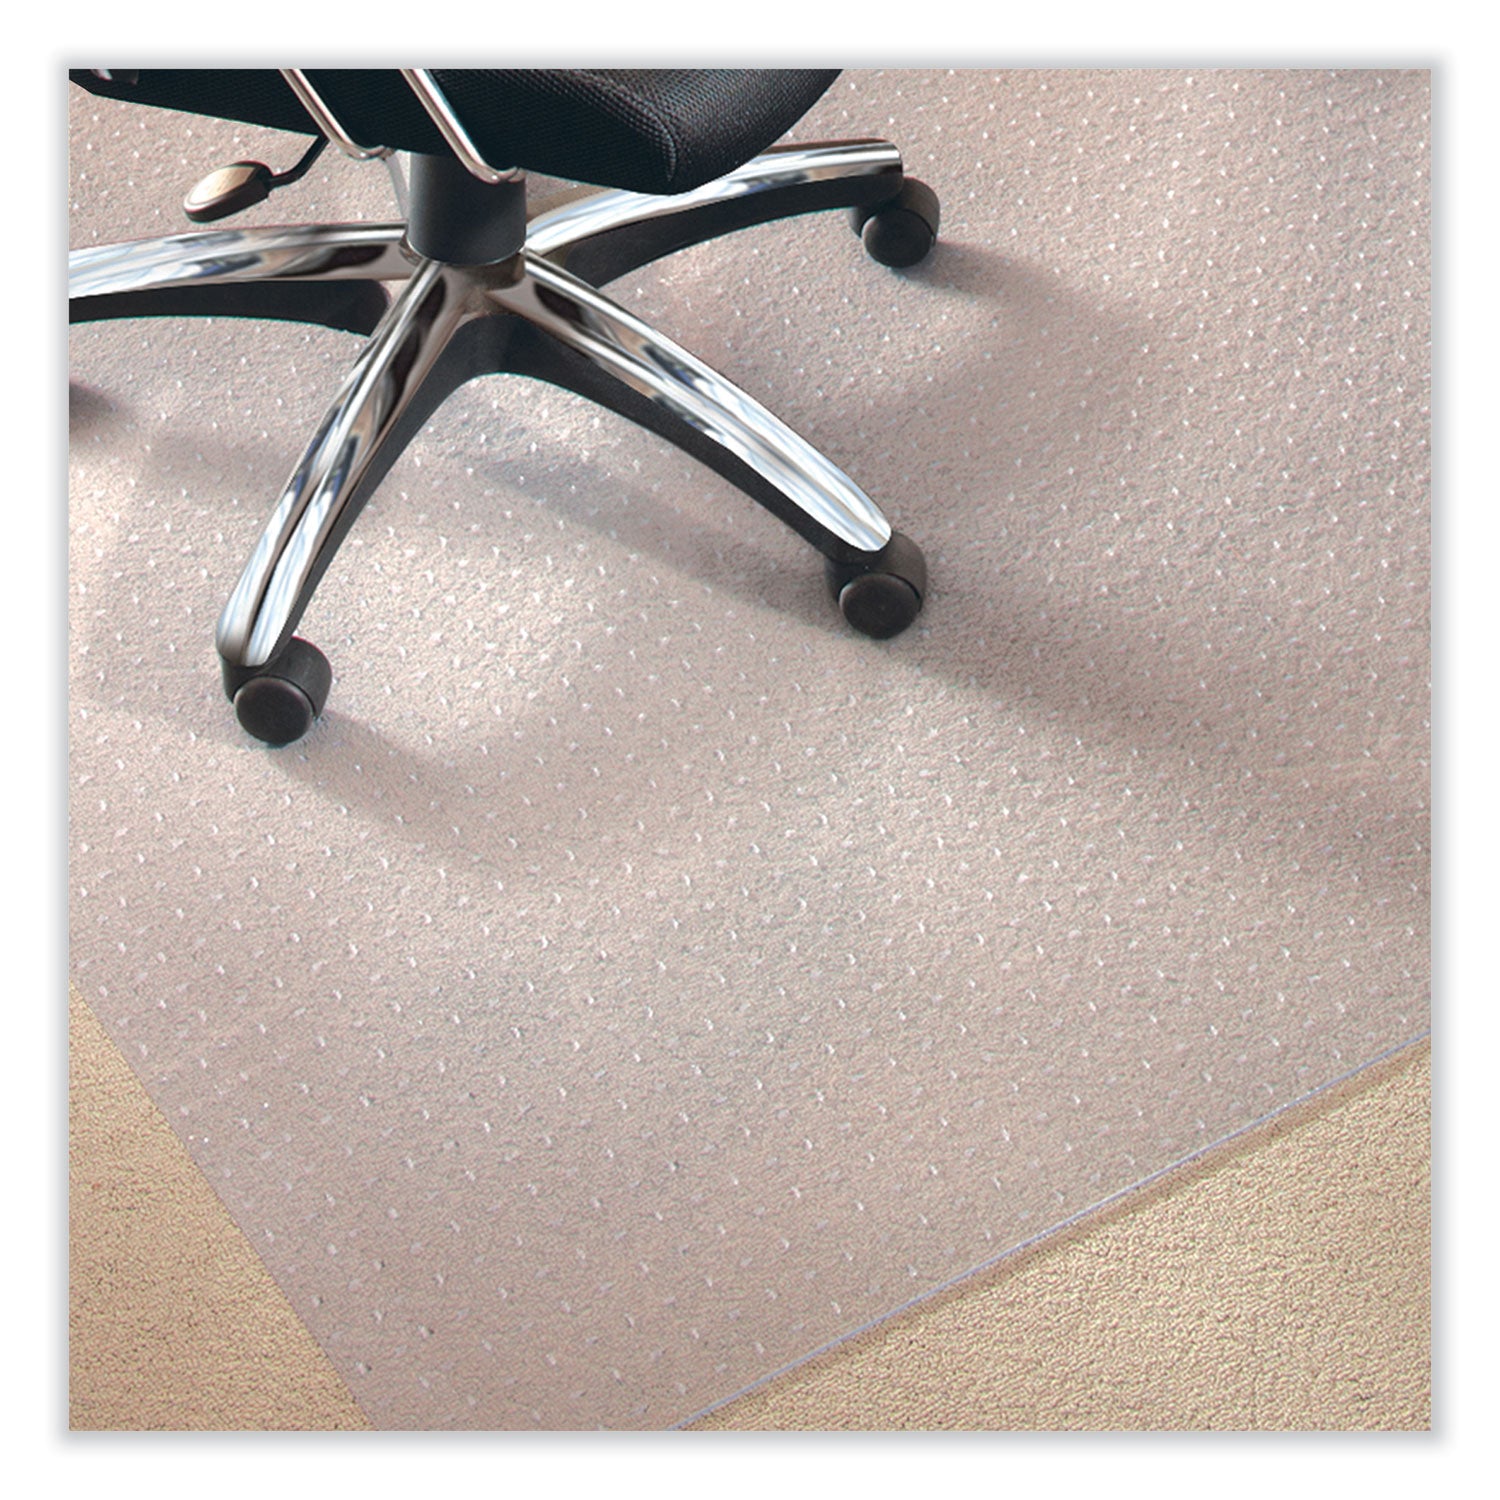 everlife-chair-mat-for-medium-pile-carpet-square-60-x-60-clear-ships-in-4-6-business-days_esr122681 - 6